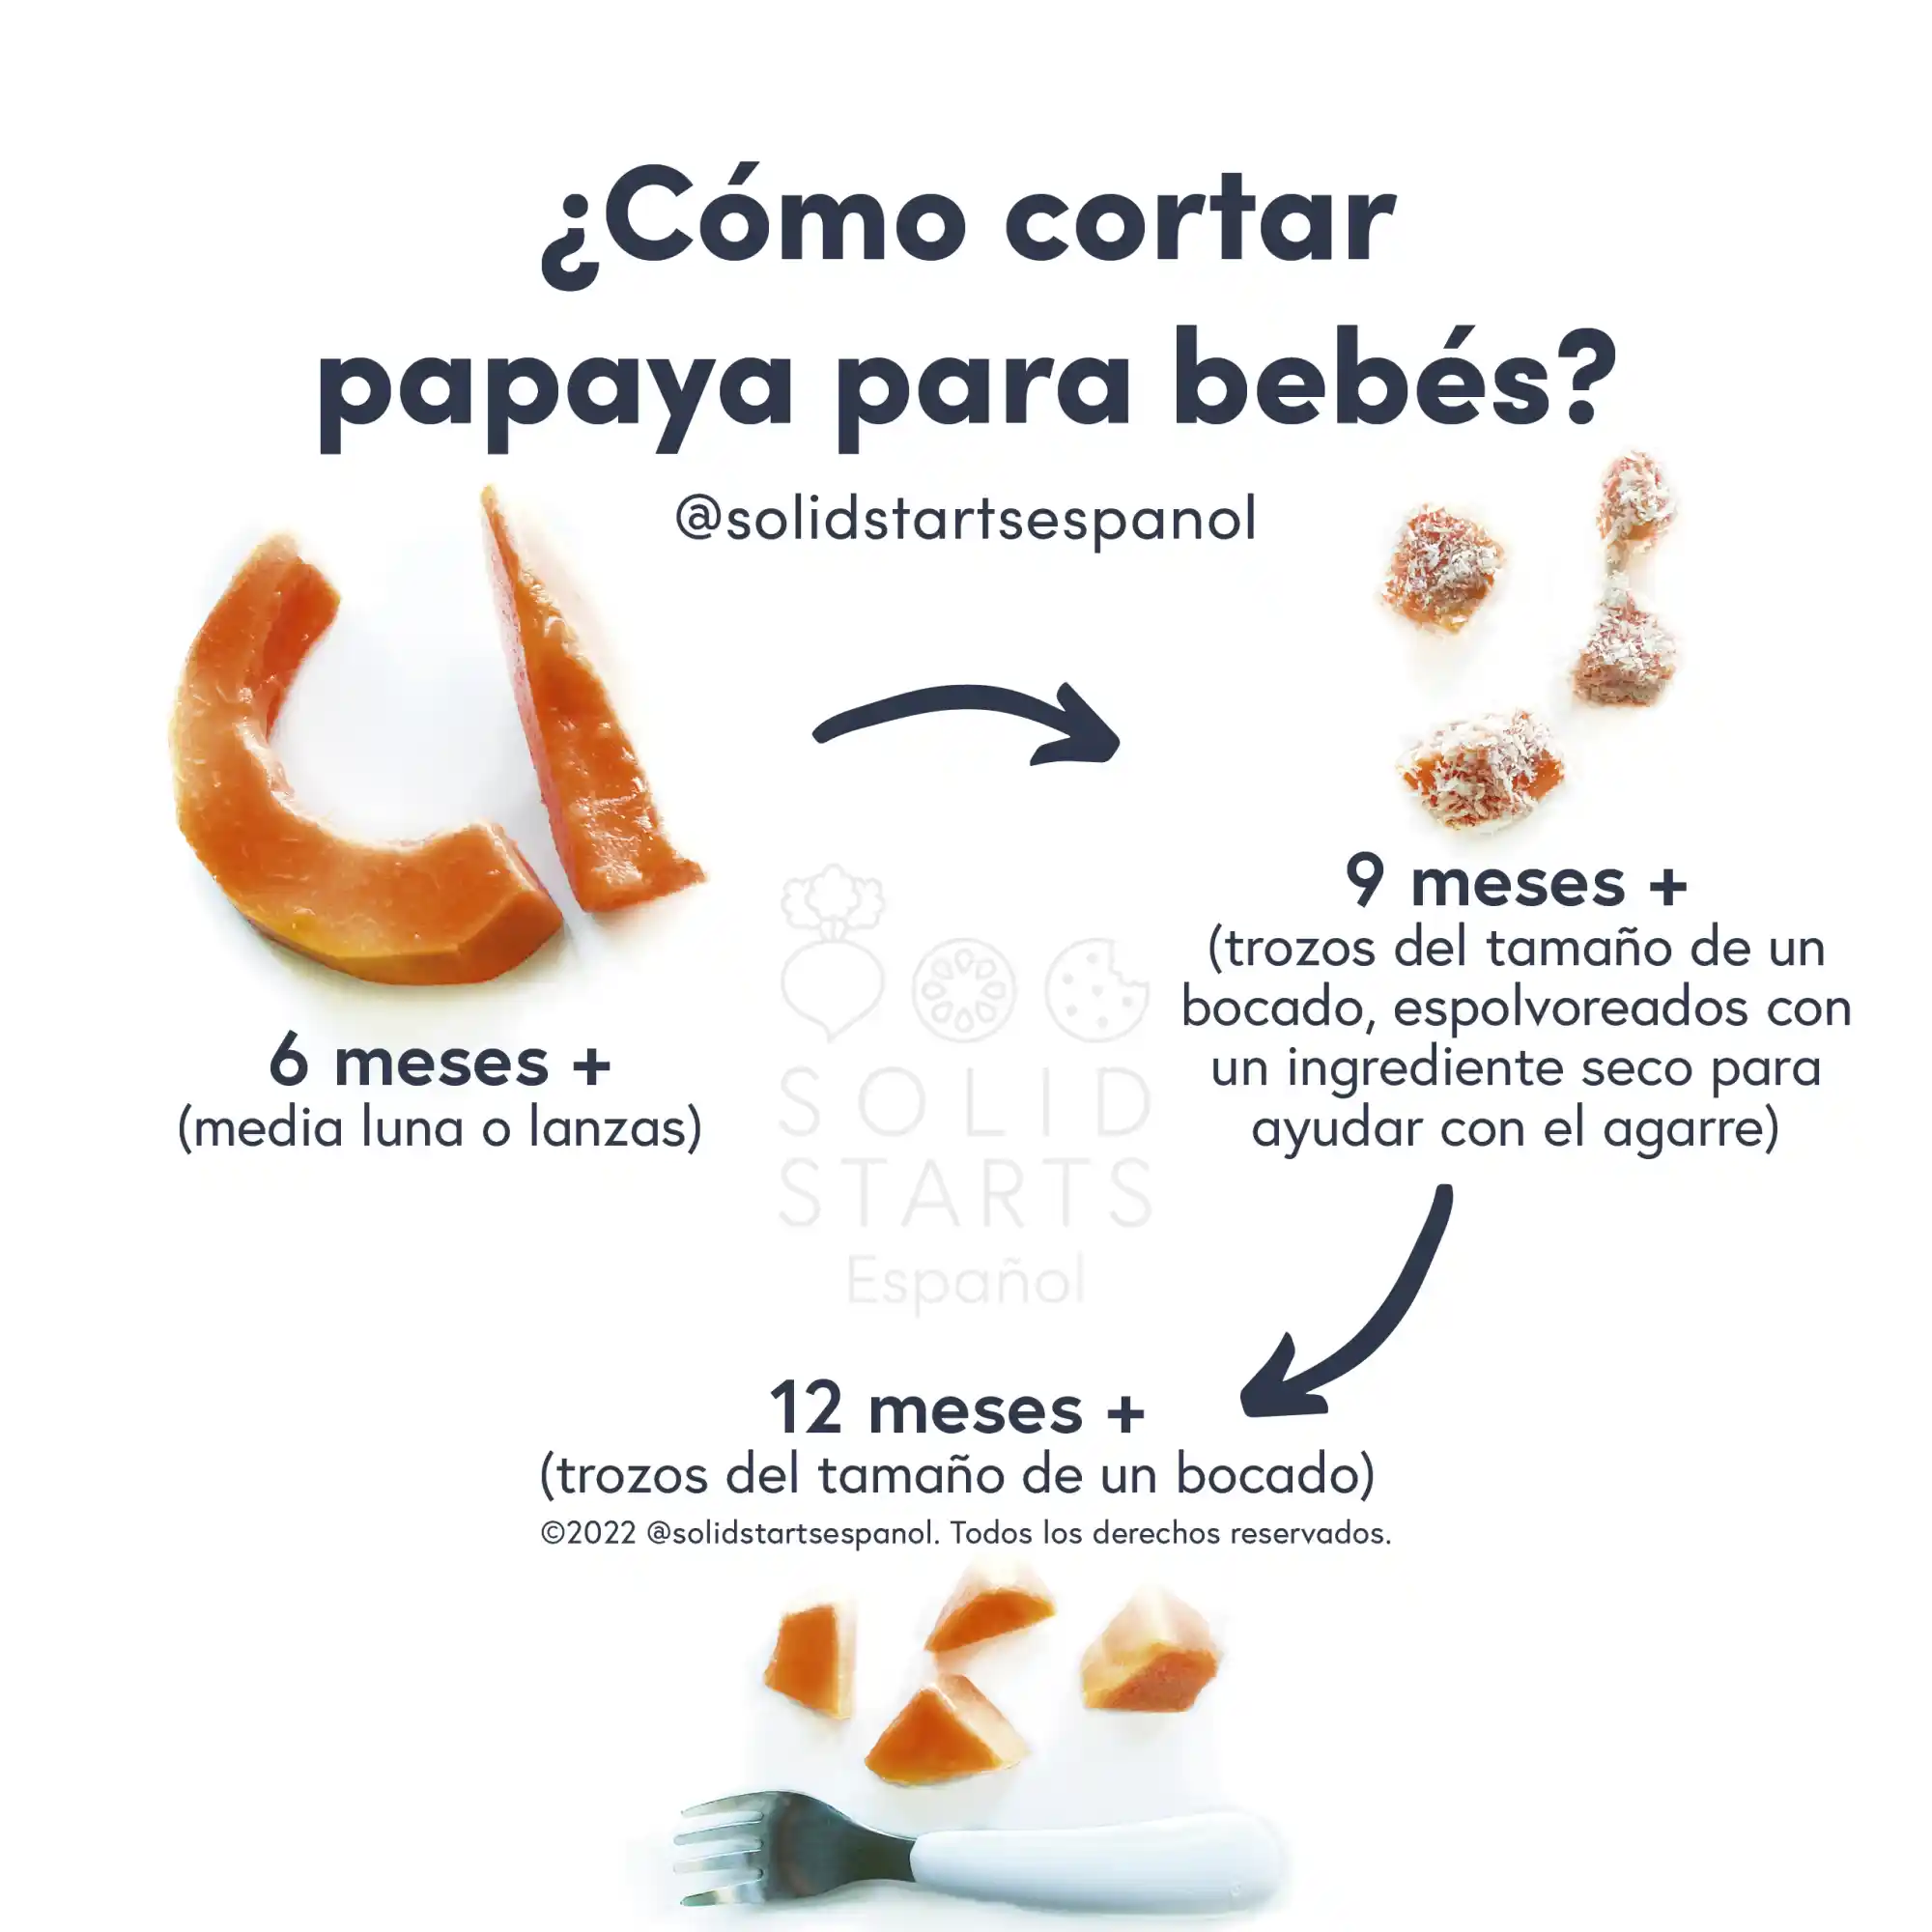 a Solid Starts infographic with the header How to Cut Papaya for Babies: large ripe handles or spears for 6 months+, bite size pieces coated in a topping for grip for 9 months+, bite size pieces for 12 months+